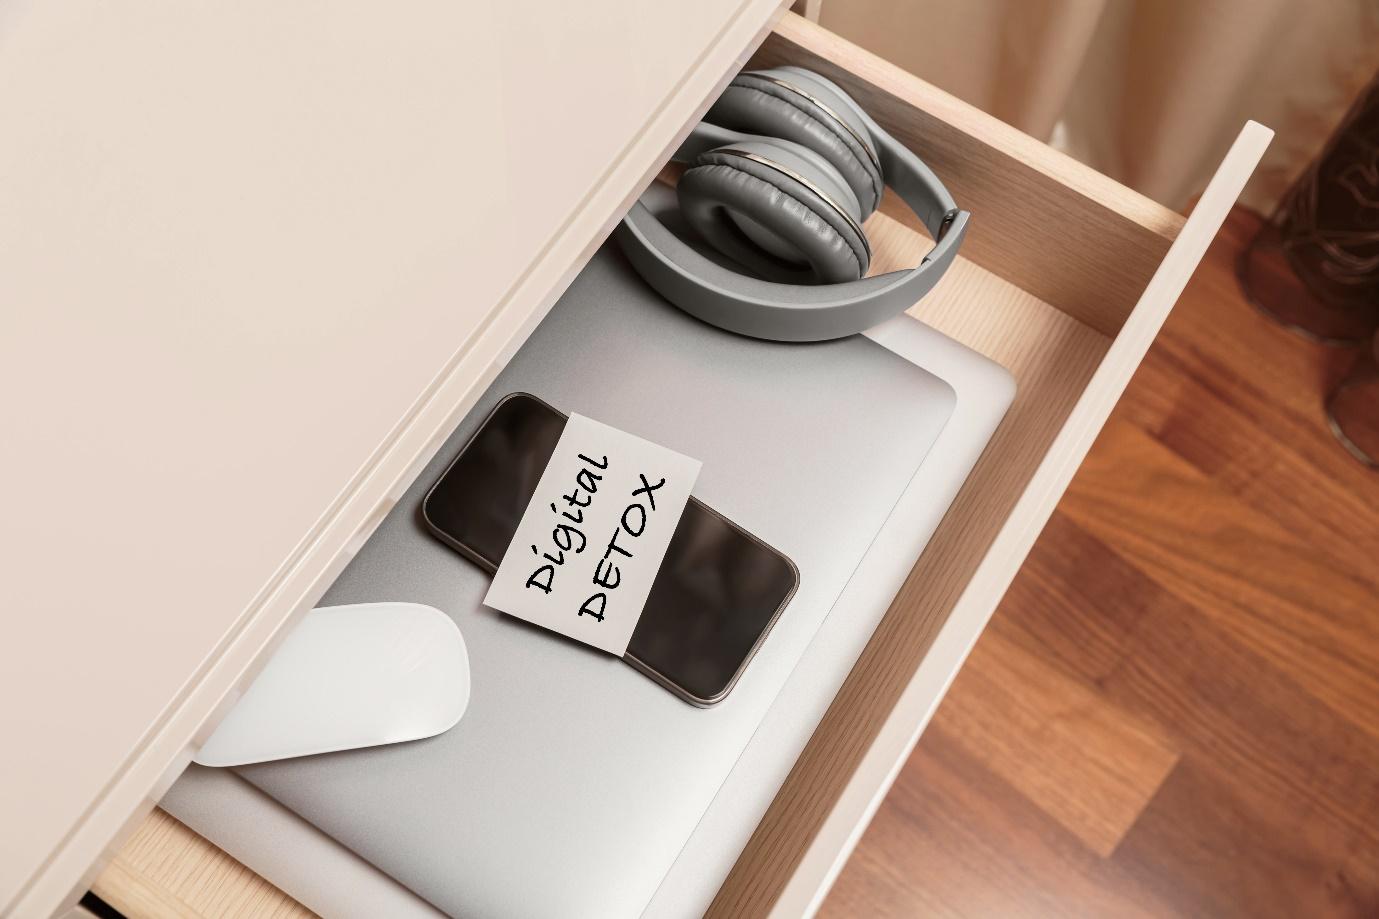 A computer and headphones in a drawer

Description automatically generated